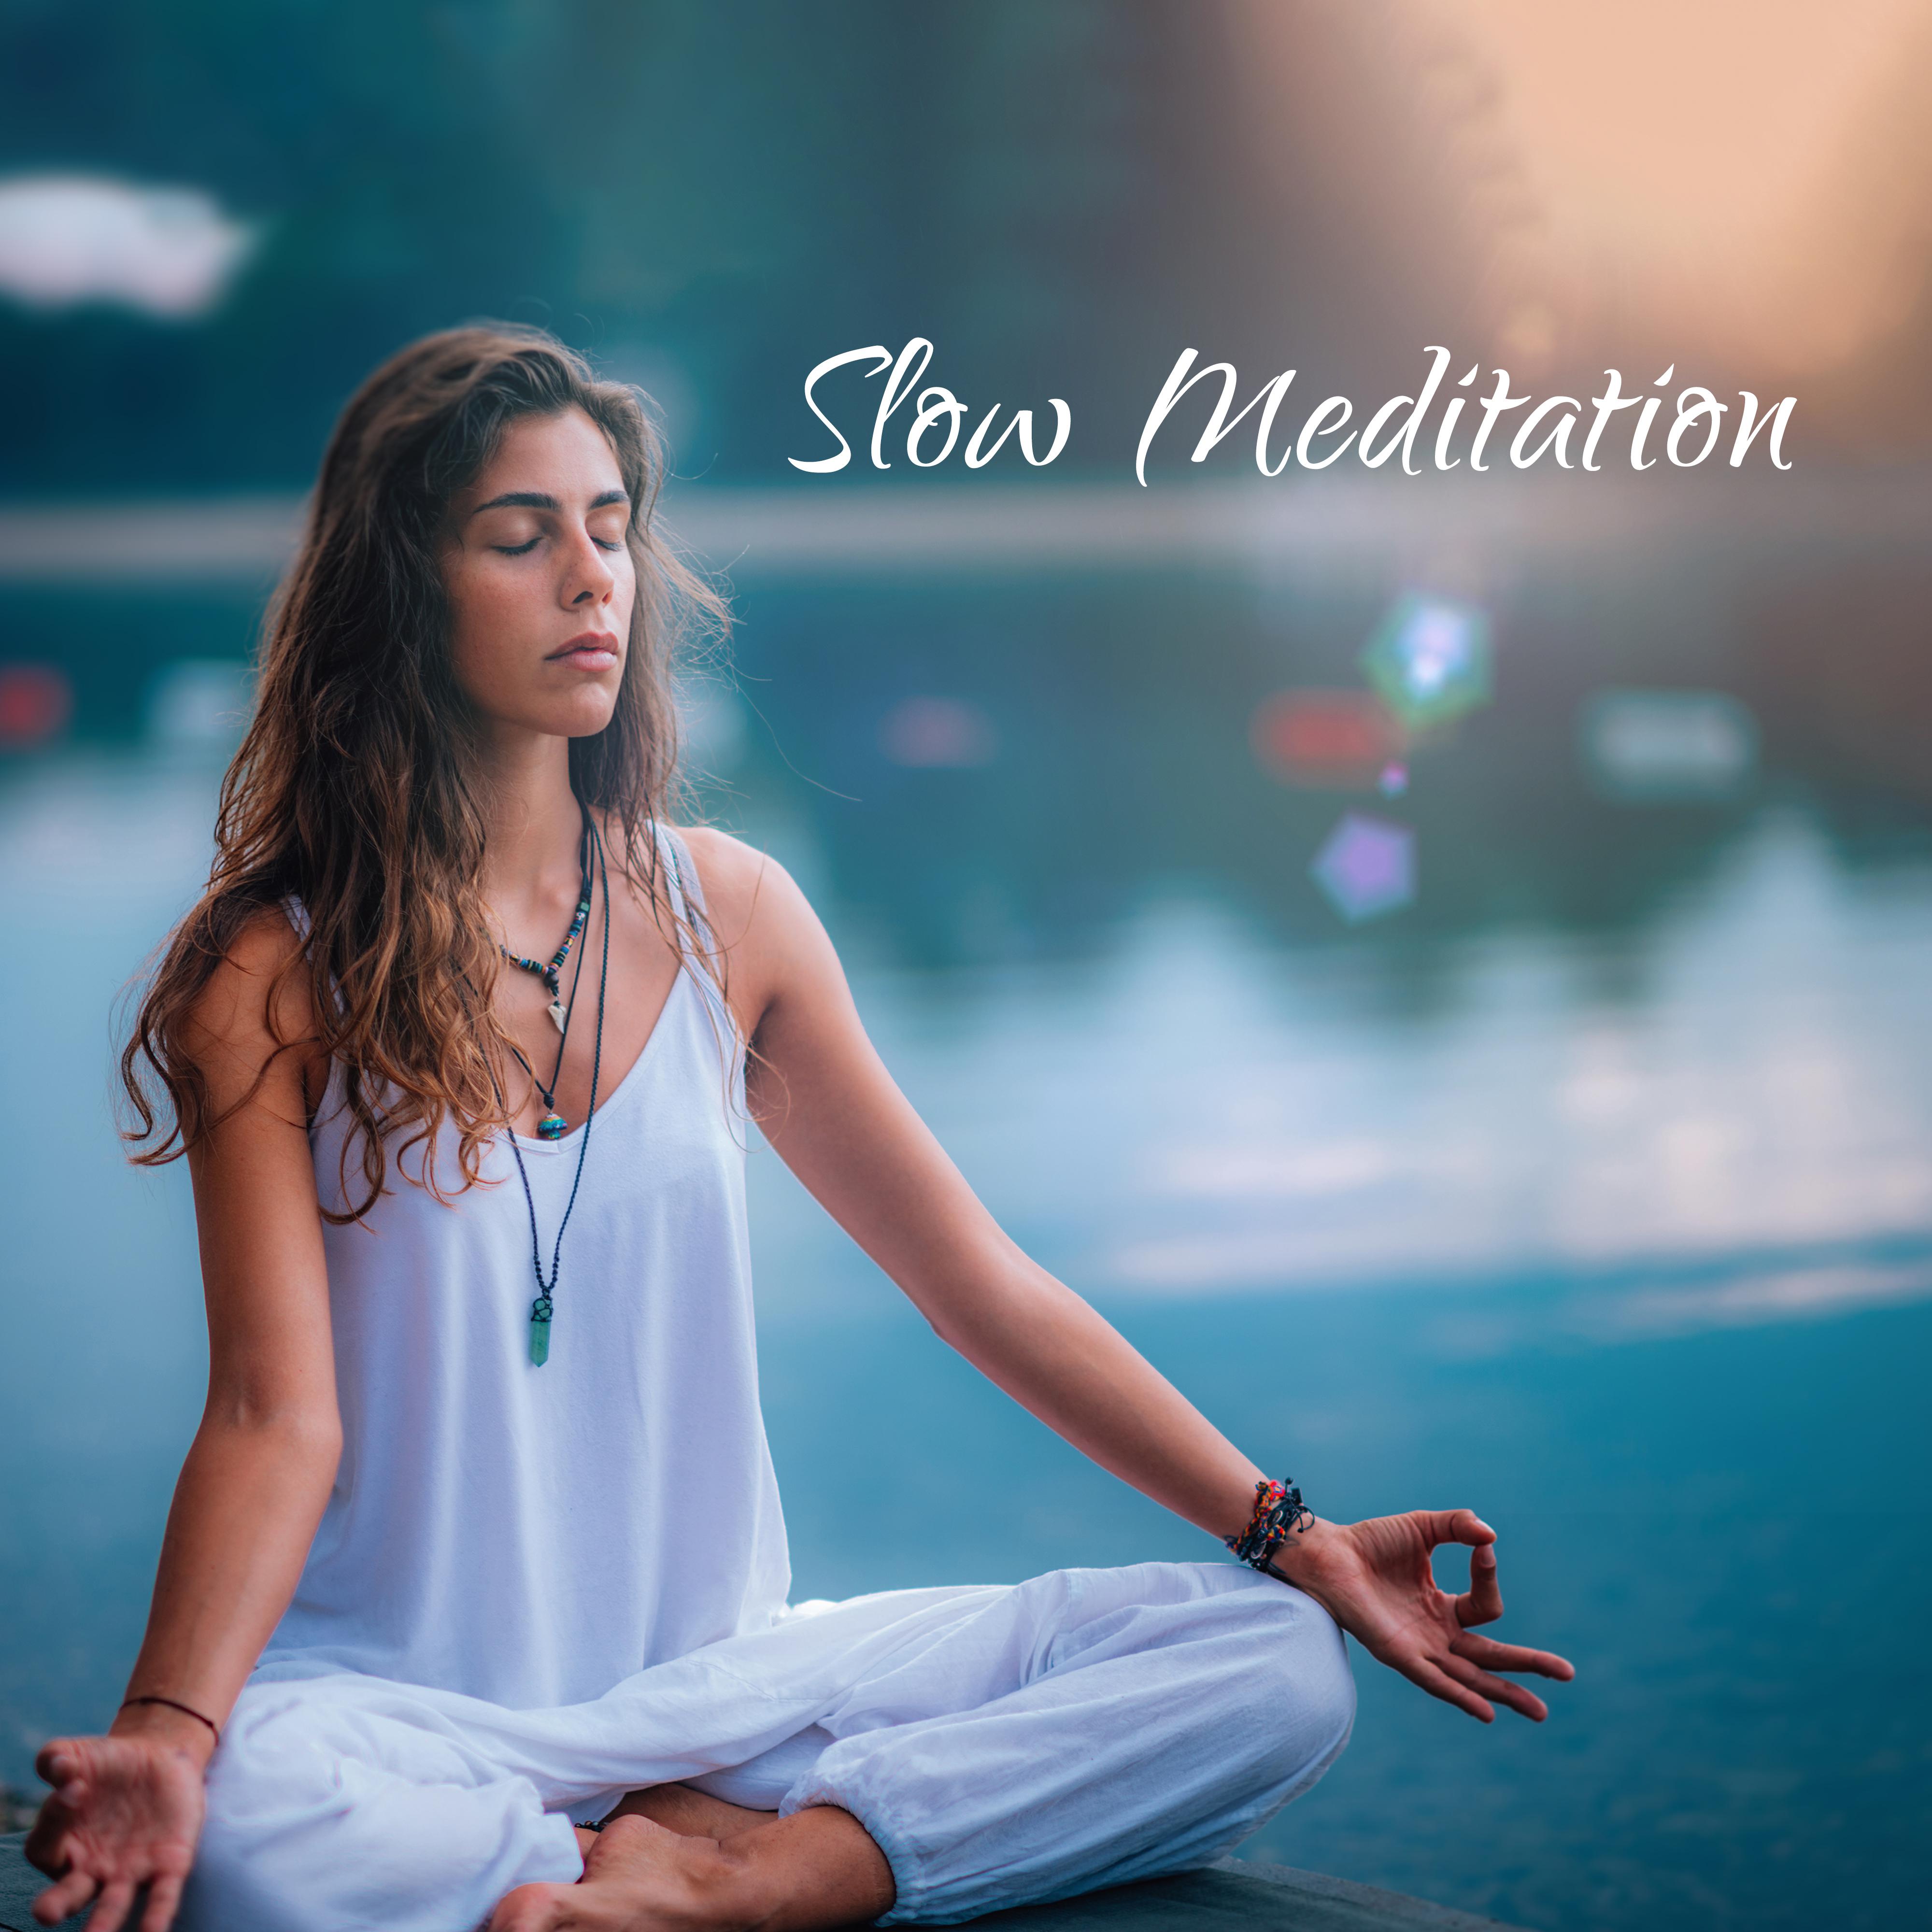 Slow Meditation  Therapeutic Songs for Relaxation, Yoga, Deep Meditation, Stress Relief, Calm Down, Reiki Healing